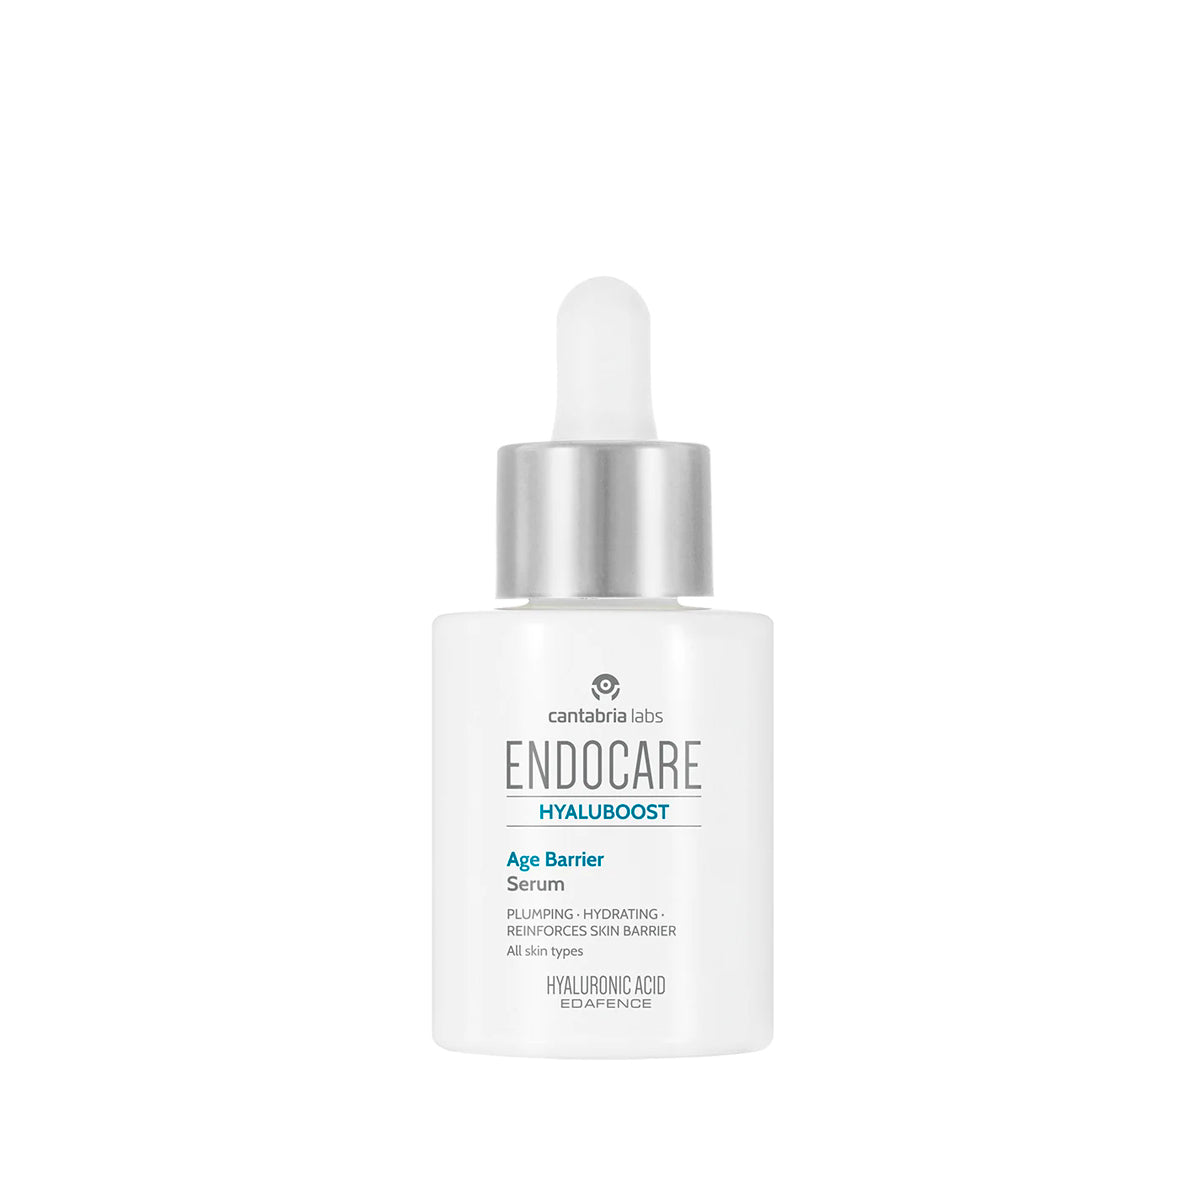 Endocare Hyaluboost Age Barrier Serum 30ml. Cantabria Labs